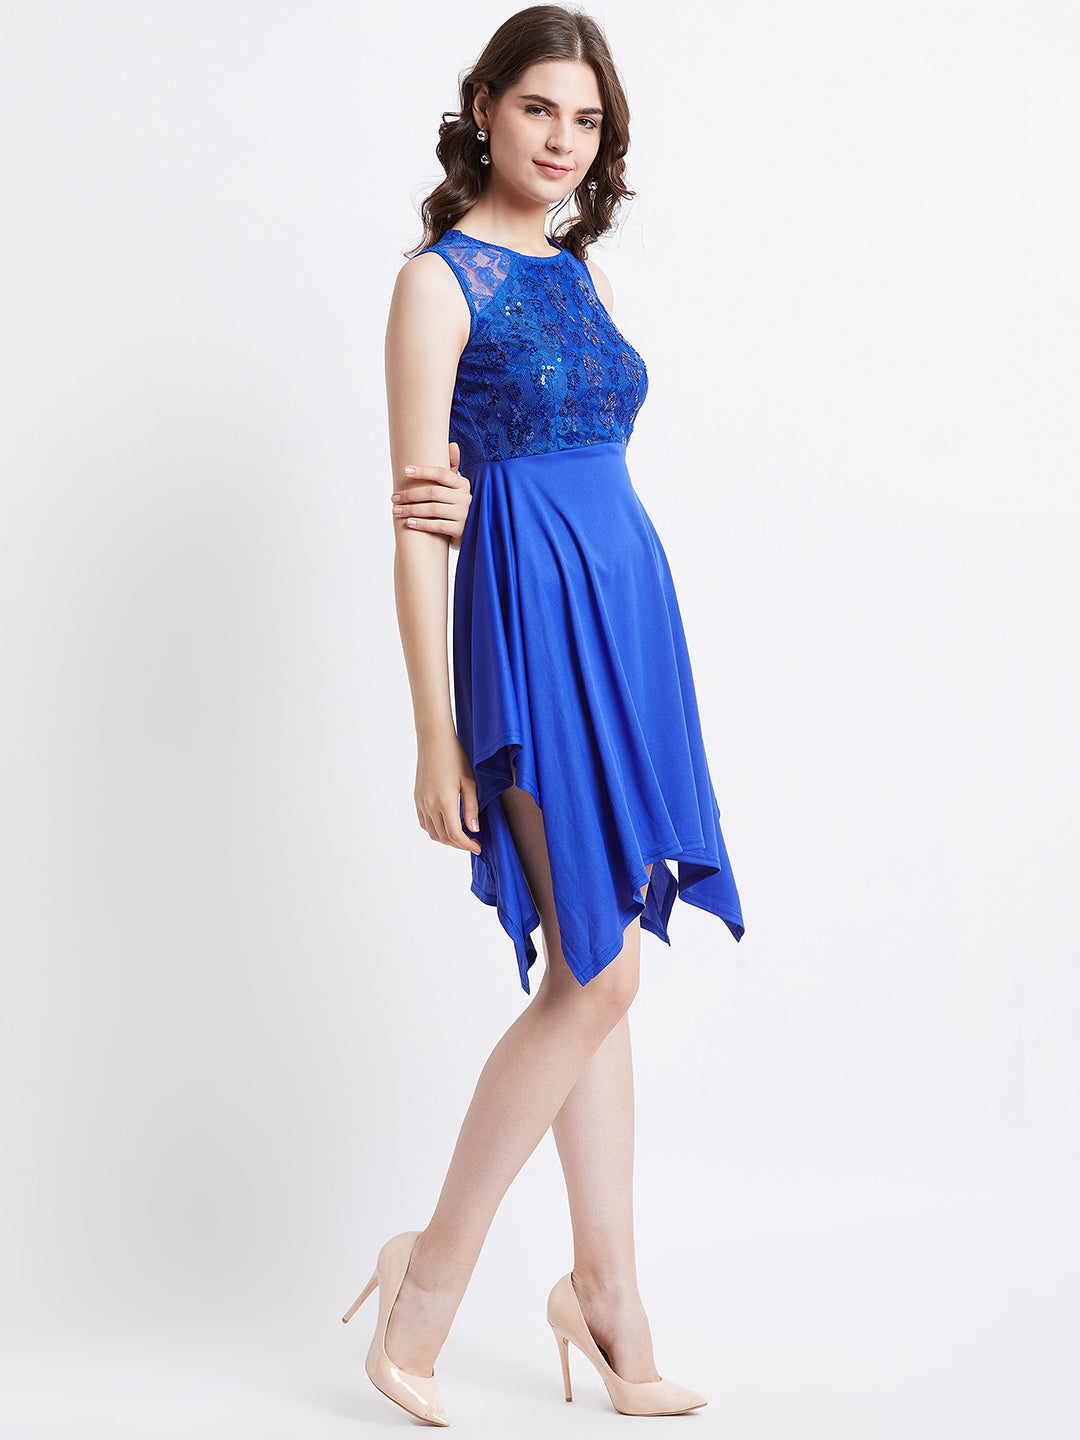 LY2 Polyester Blue Round Neck Sleeveless Fit and Flare Party Dress For Women